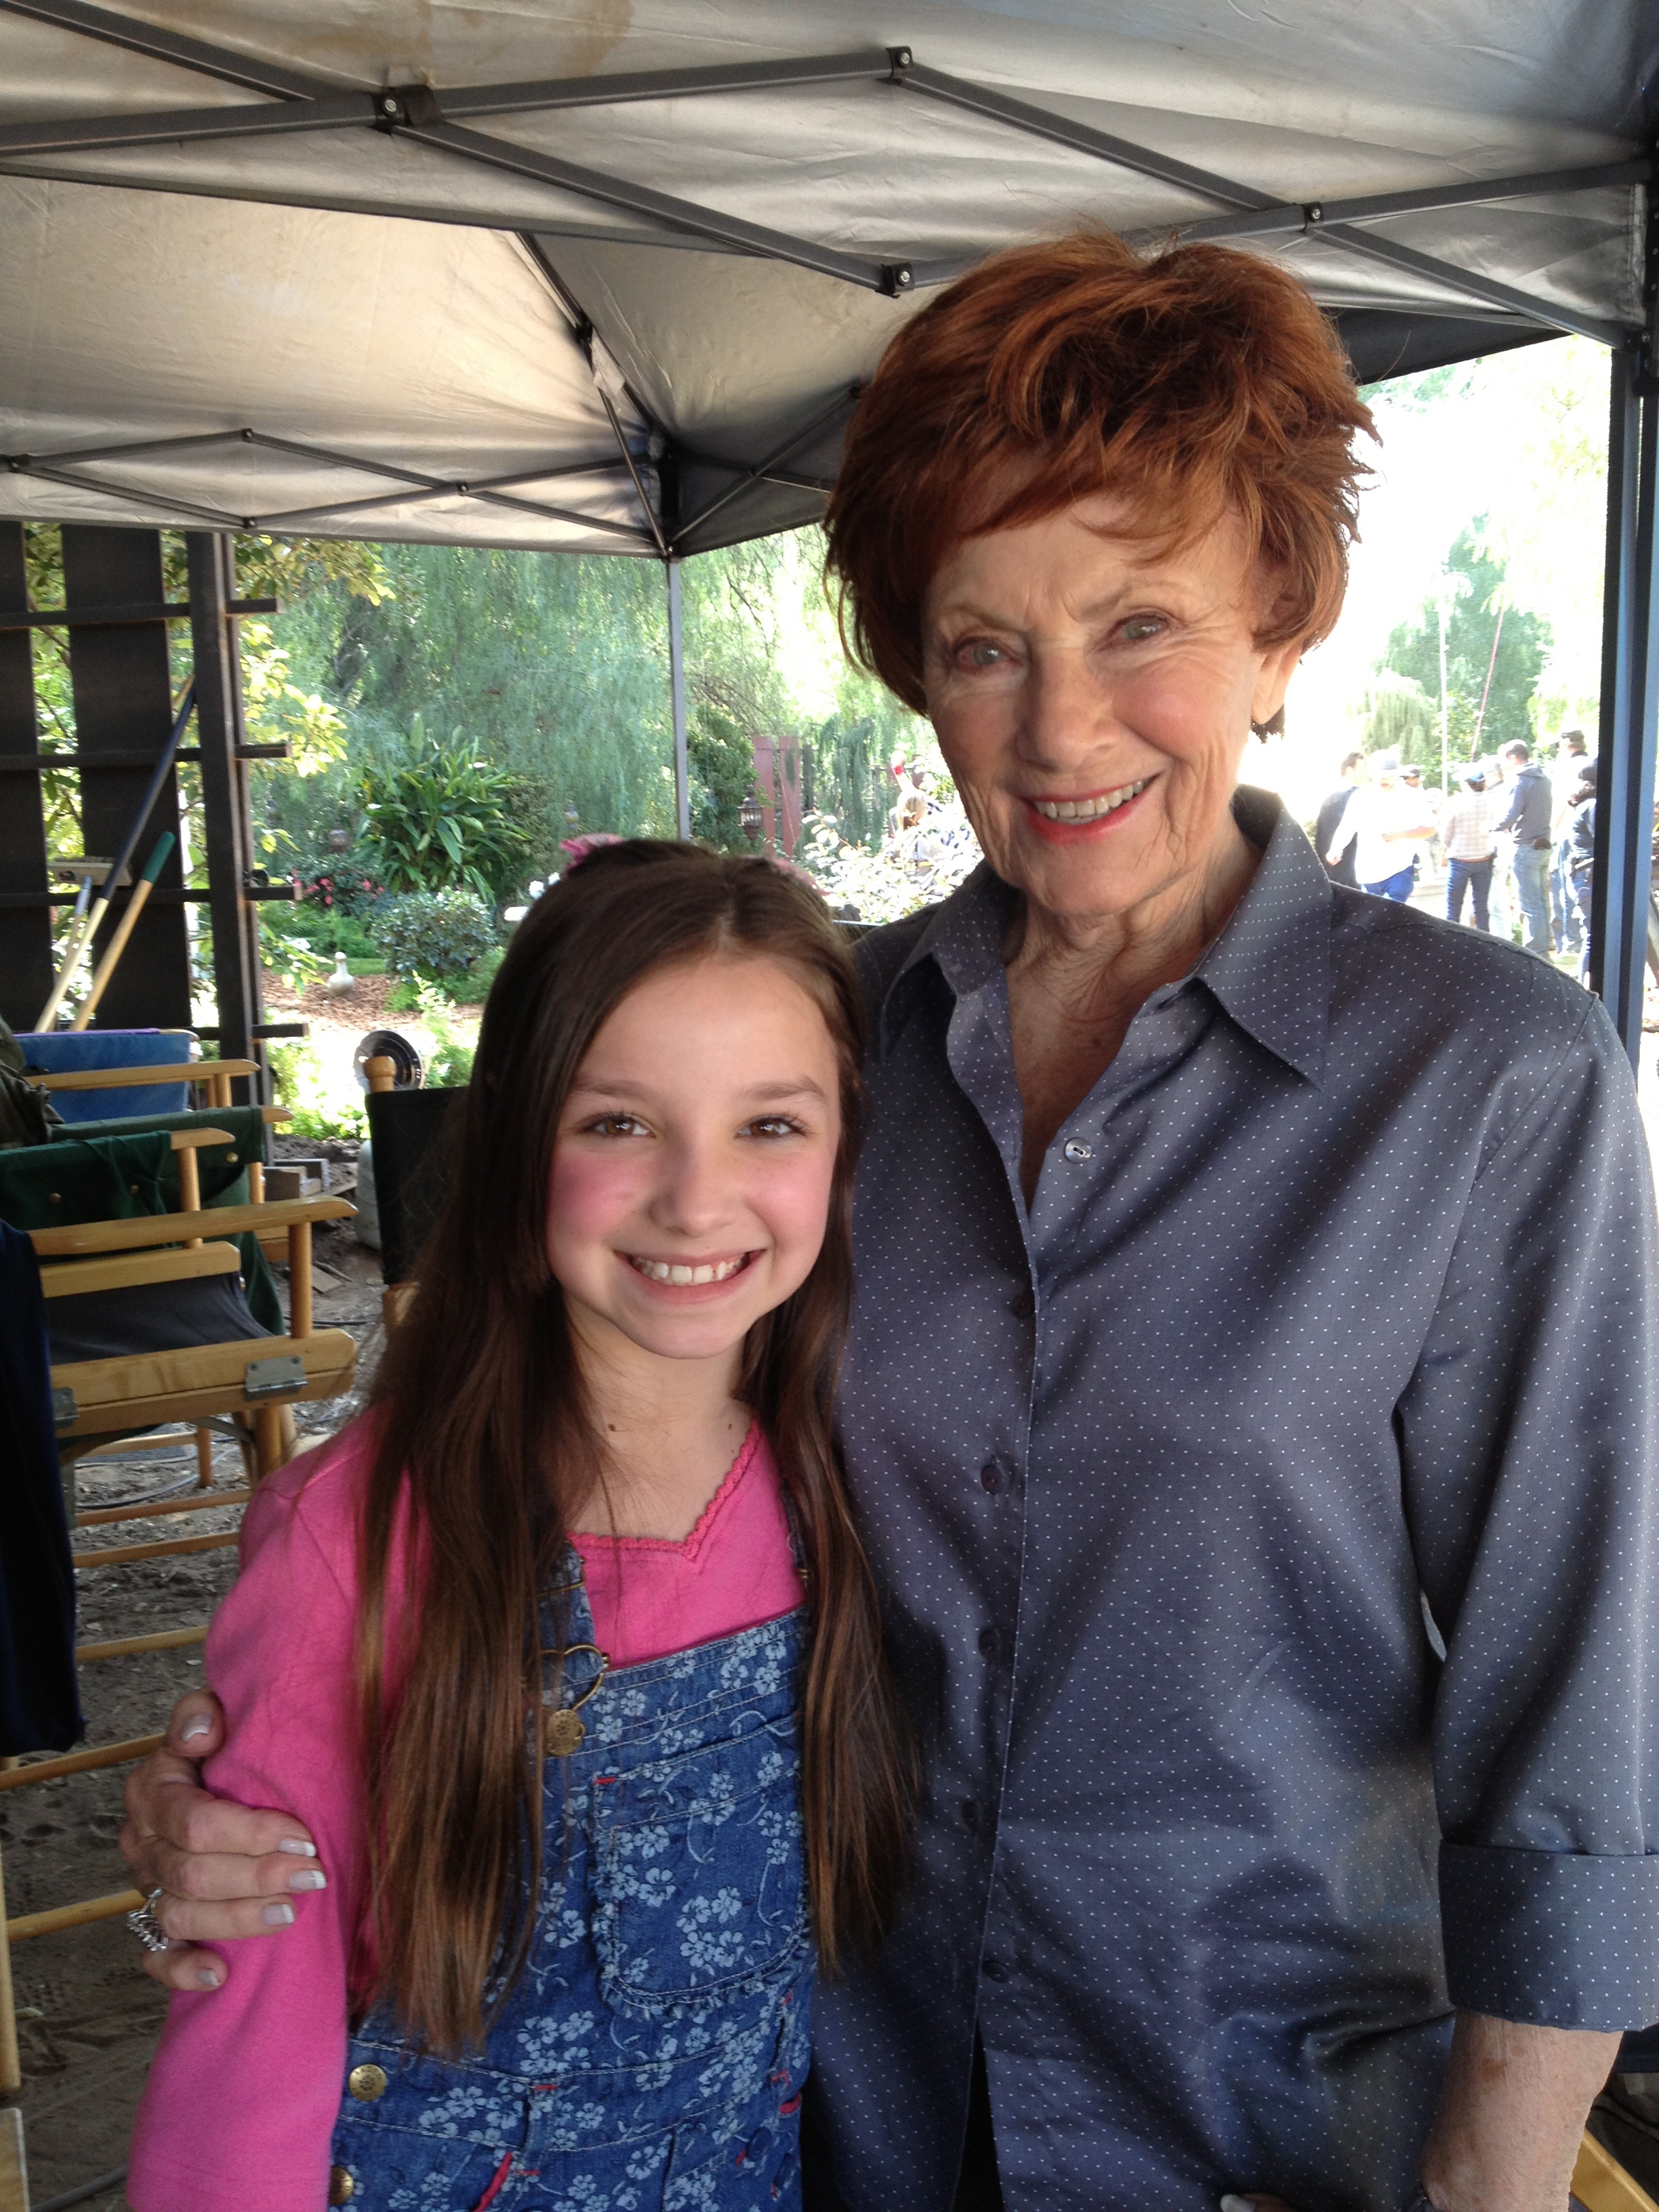 Cupids Bed and Breakfast With the legendary Marion Ross